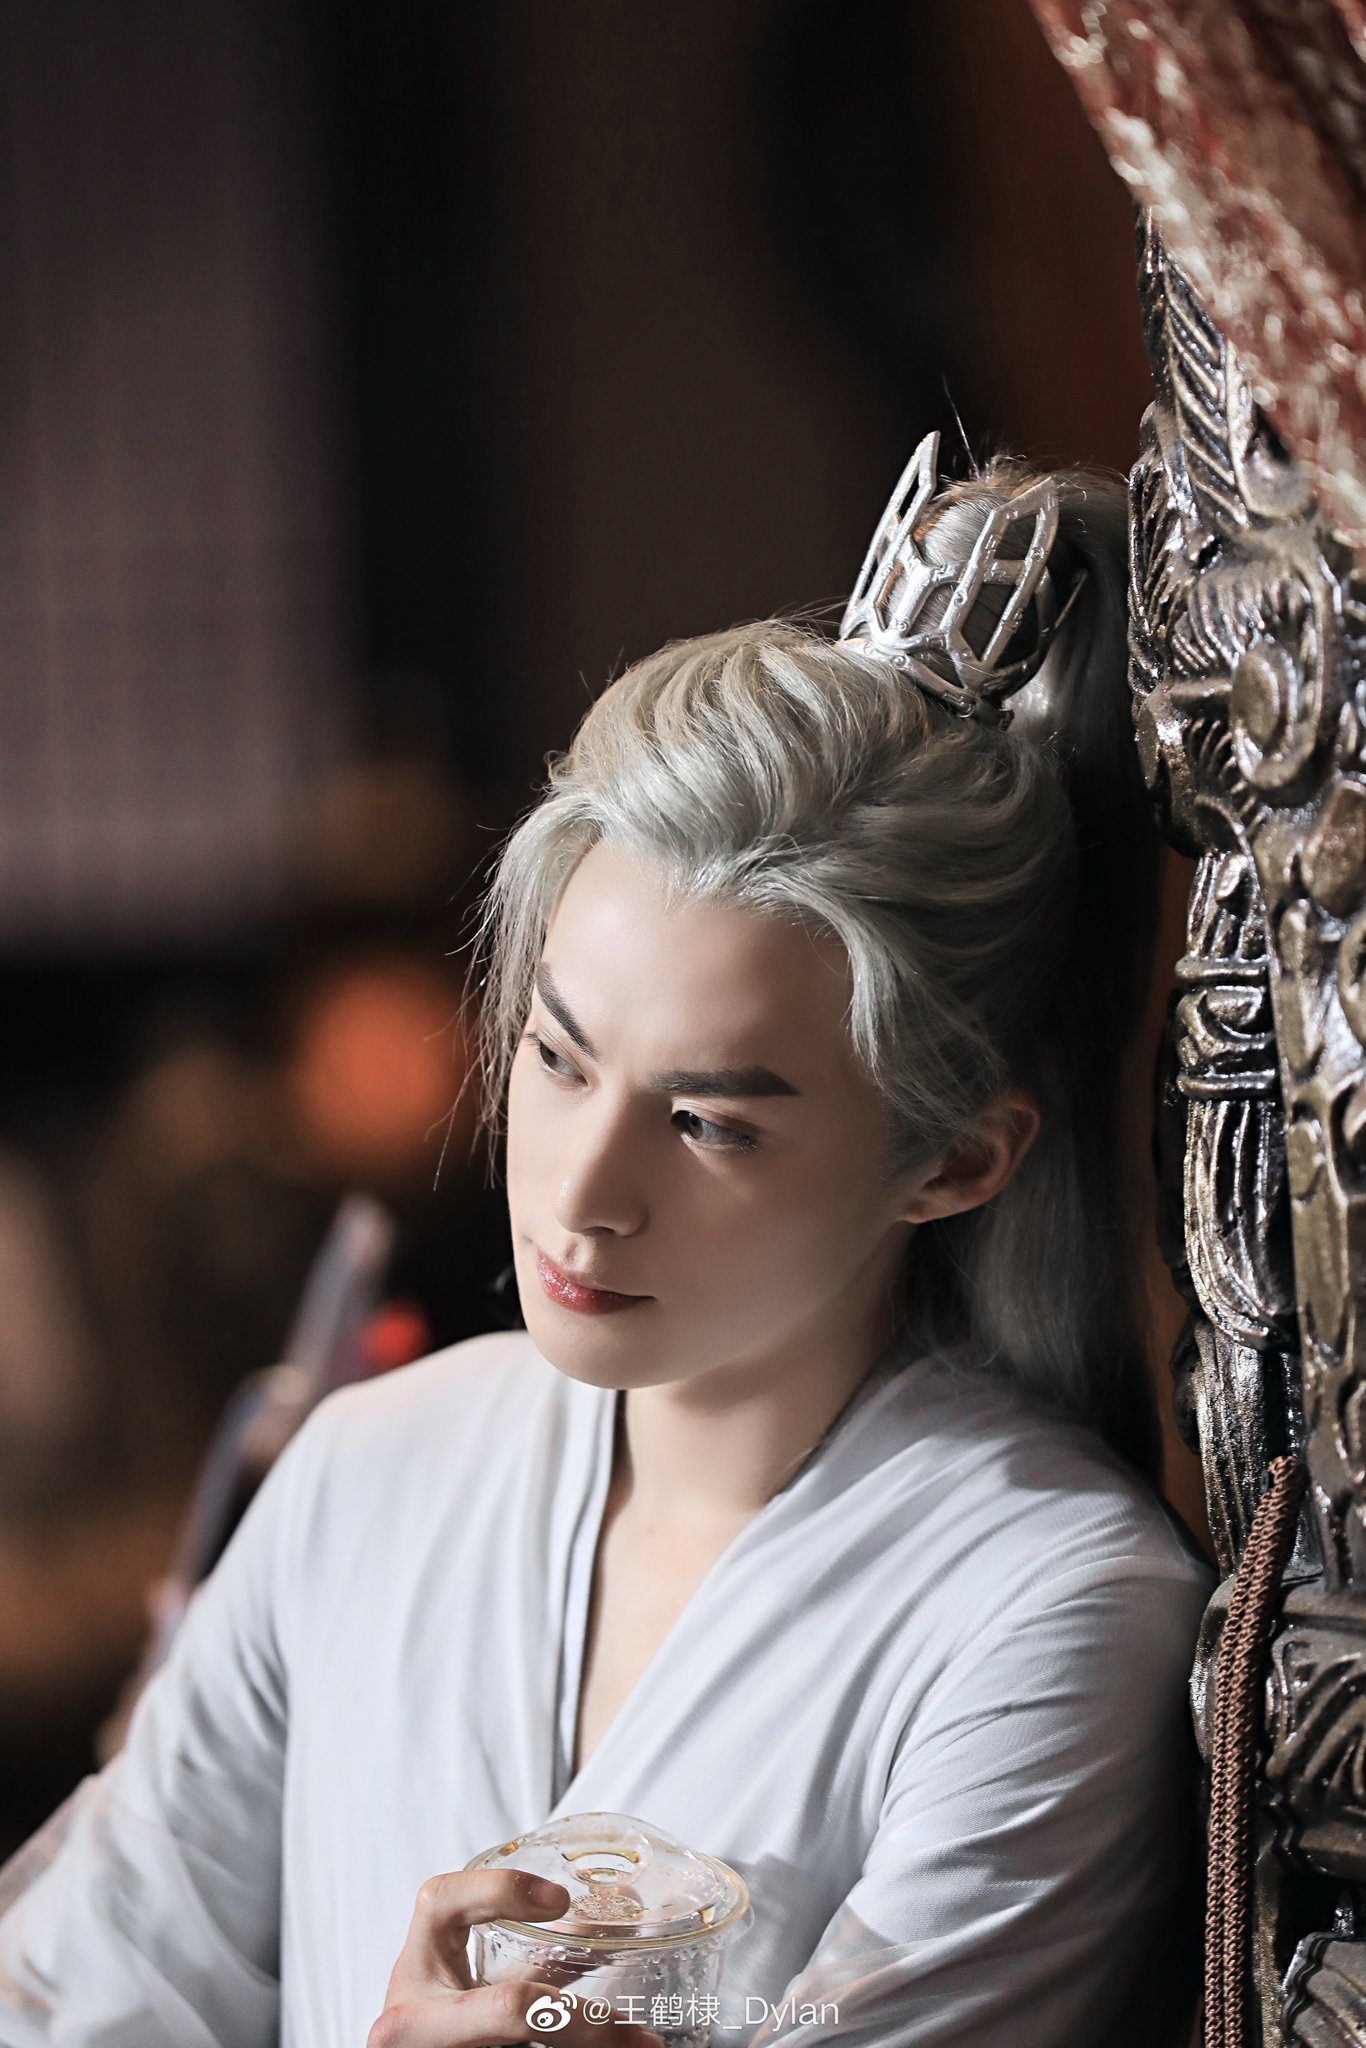 Dylan Wang's “AI-Style” Acting in “Miss the Dragon” –